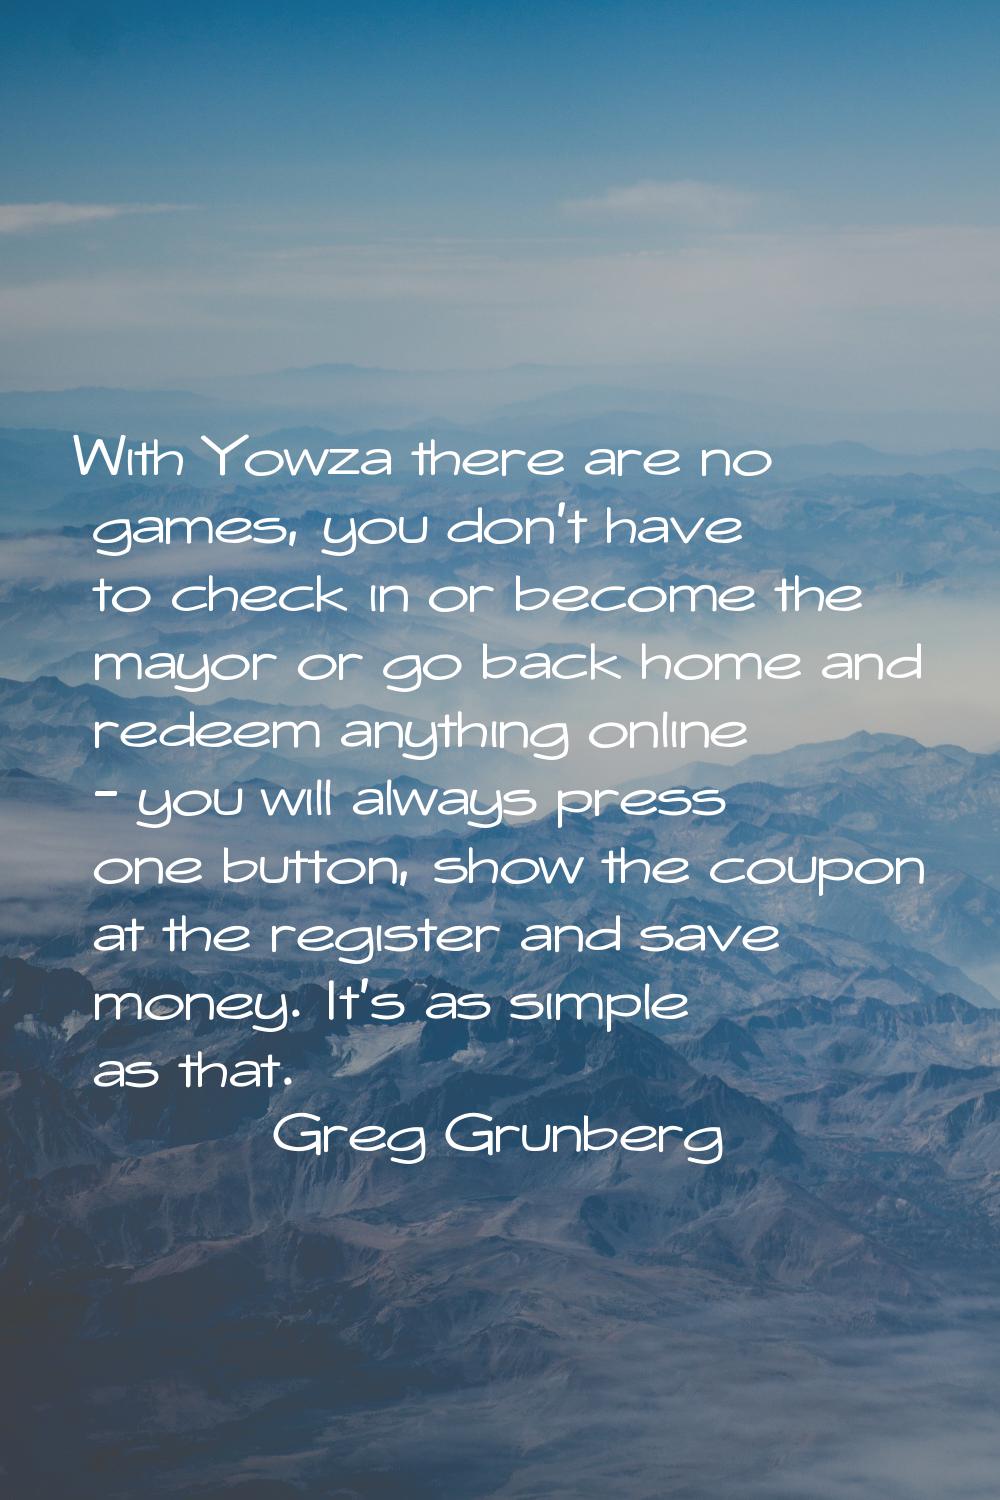 With Yowza there are no games, you don't have to check in or become the mayor or go back home and r